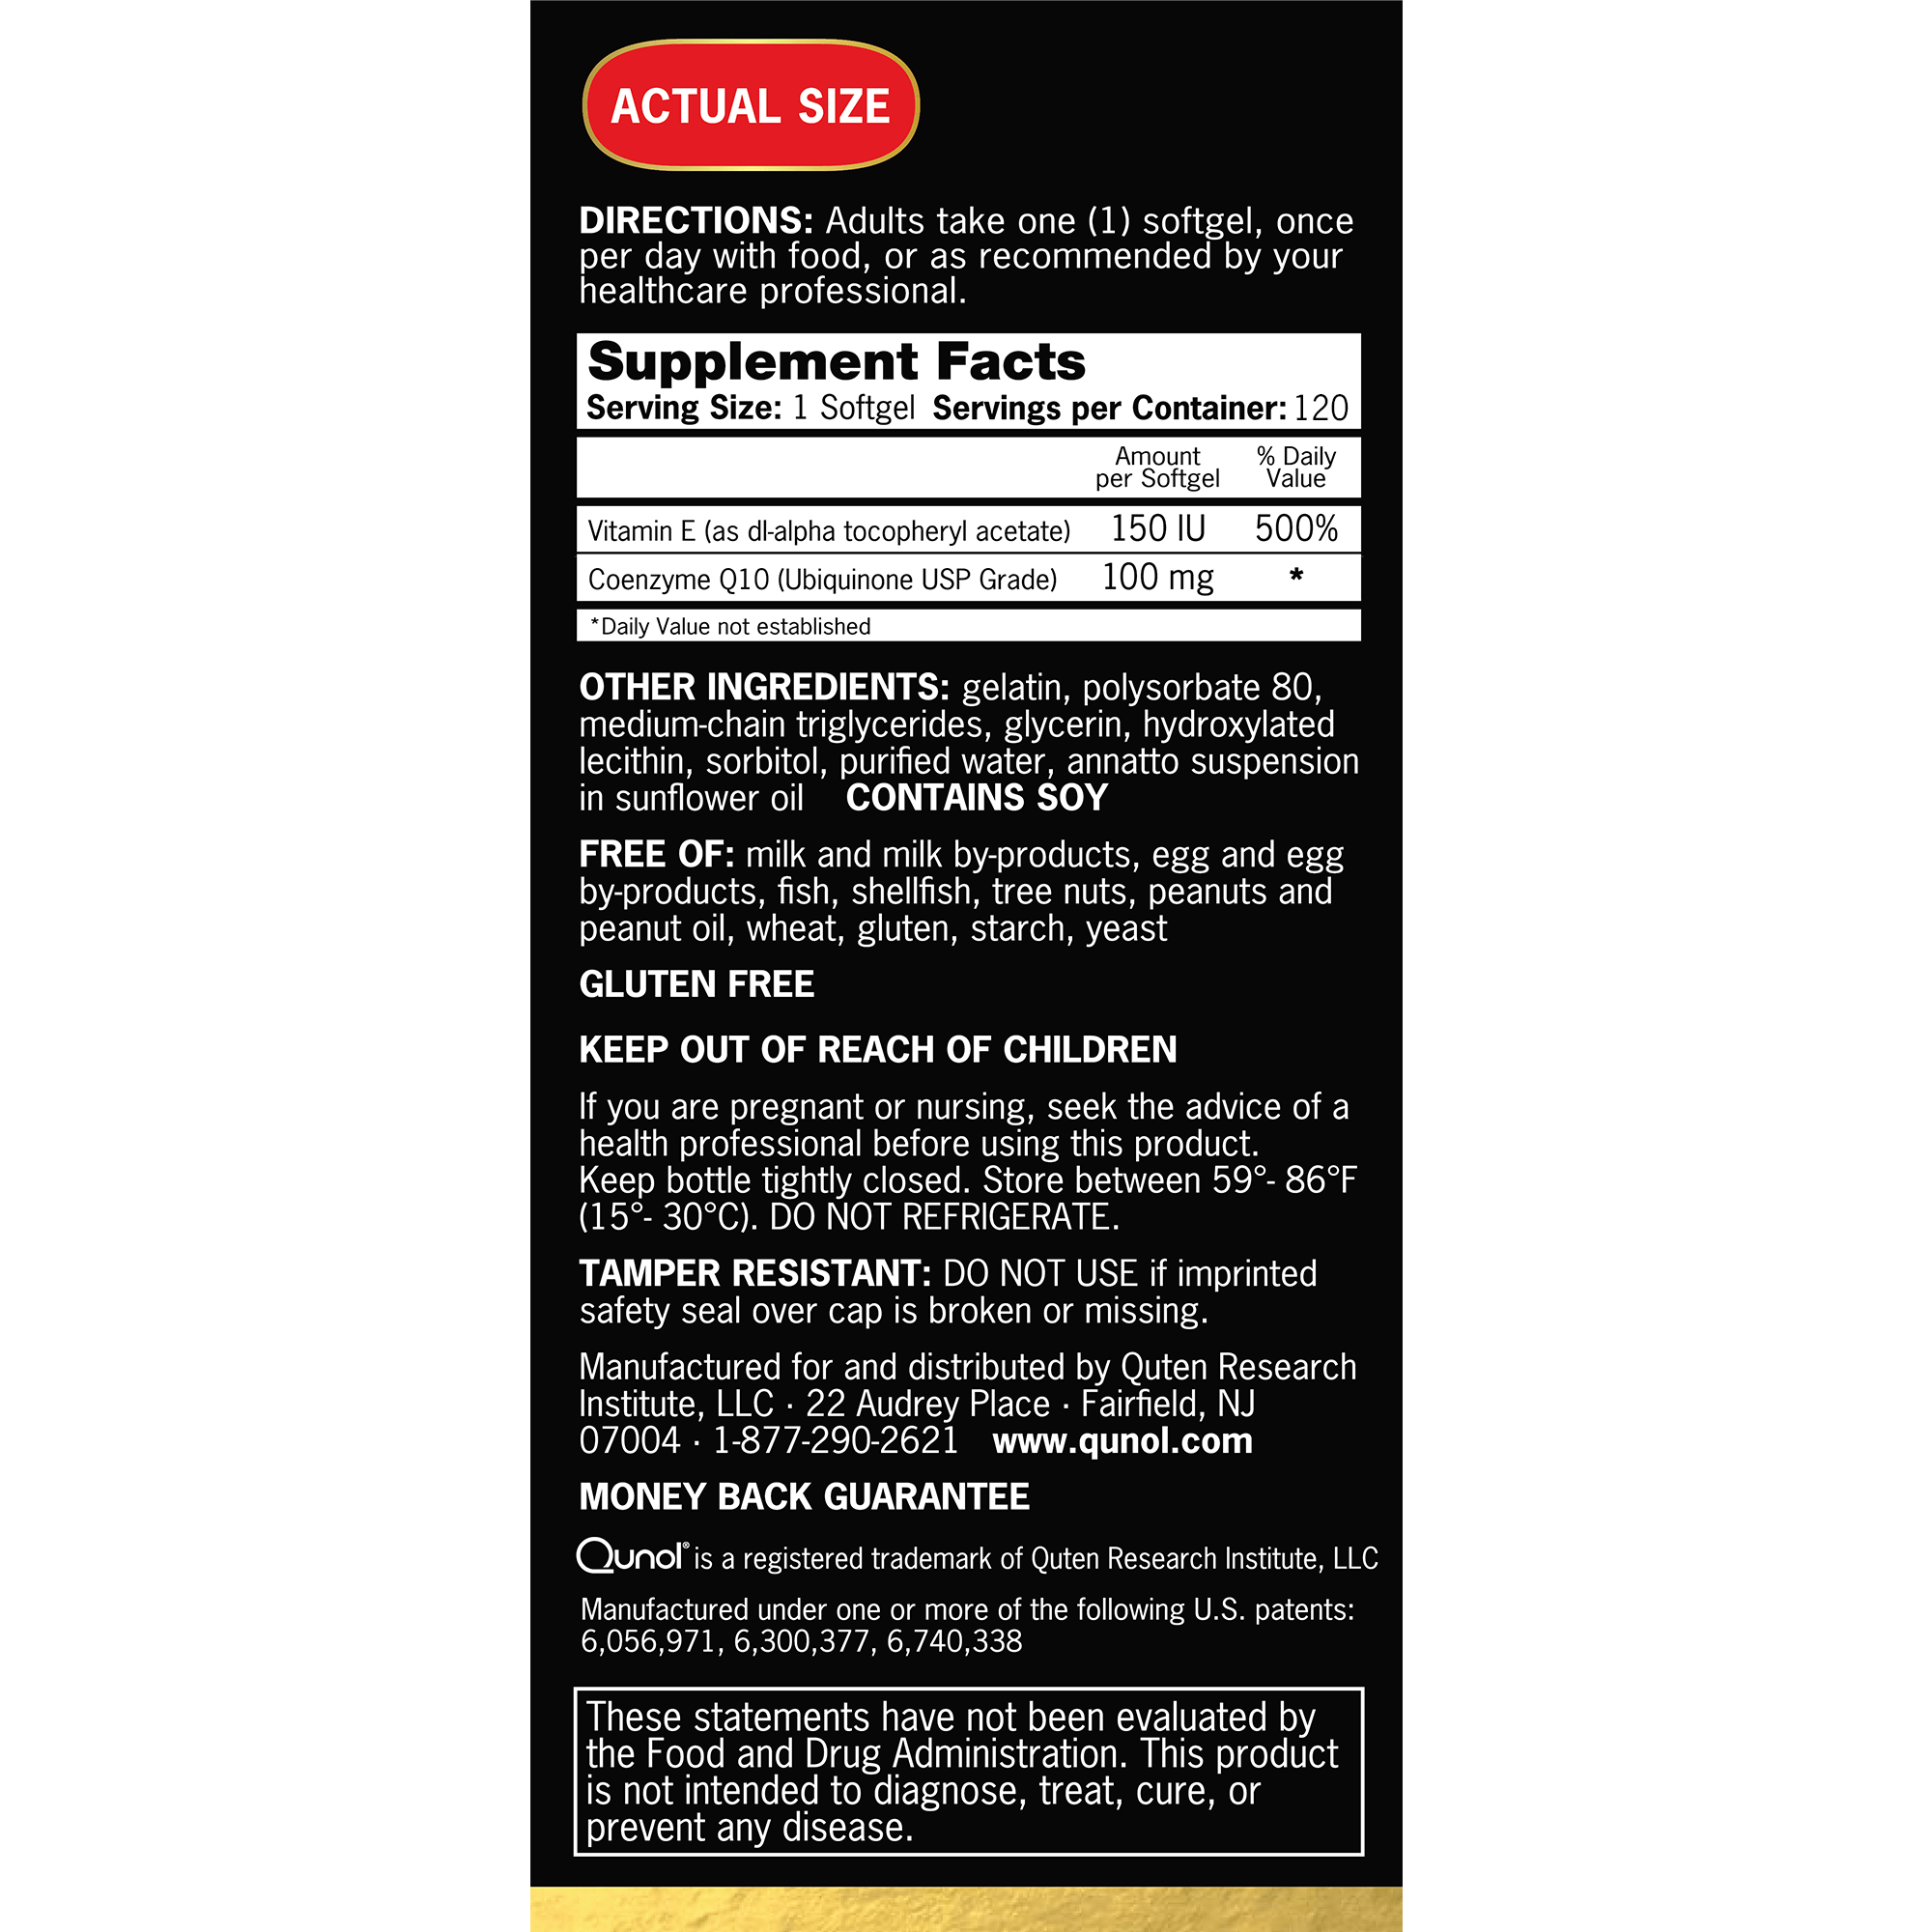 Qunol CoQ10 100mg Softgels, Ultra CoQ10 100mg, 3x Better Absorption, Antioxidant for Heart Health & Energy Production, Coenzyme Q10 Vitamins and Supplements, 4 Month Supply, 120 Count - image 4 of 6